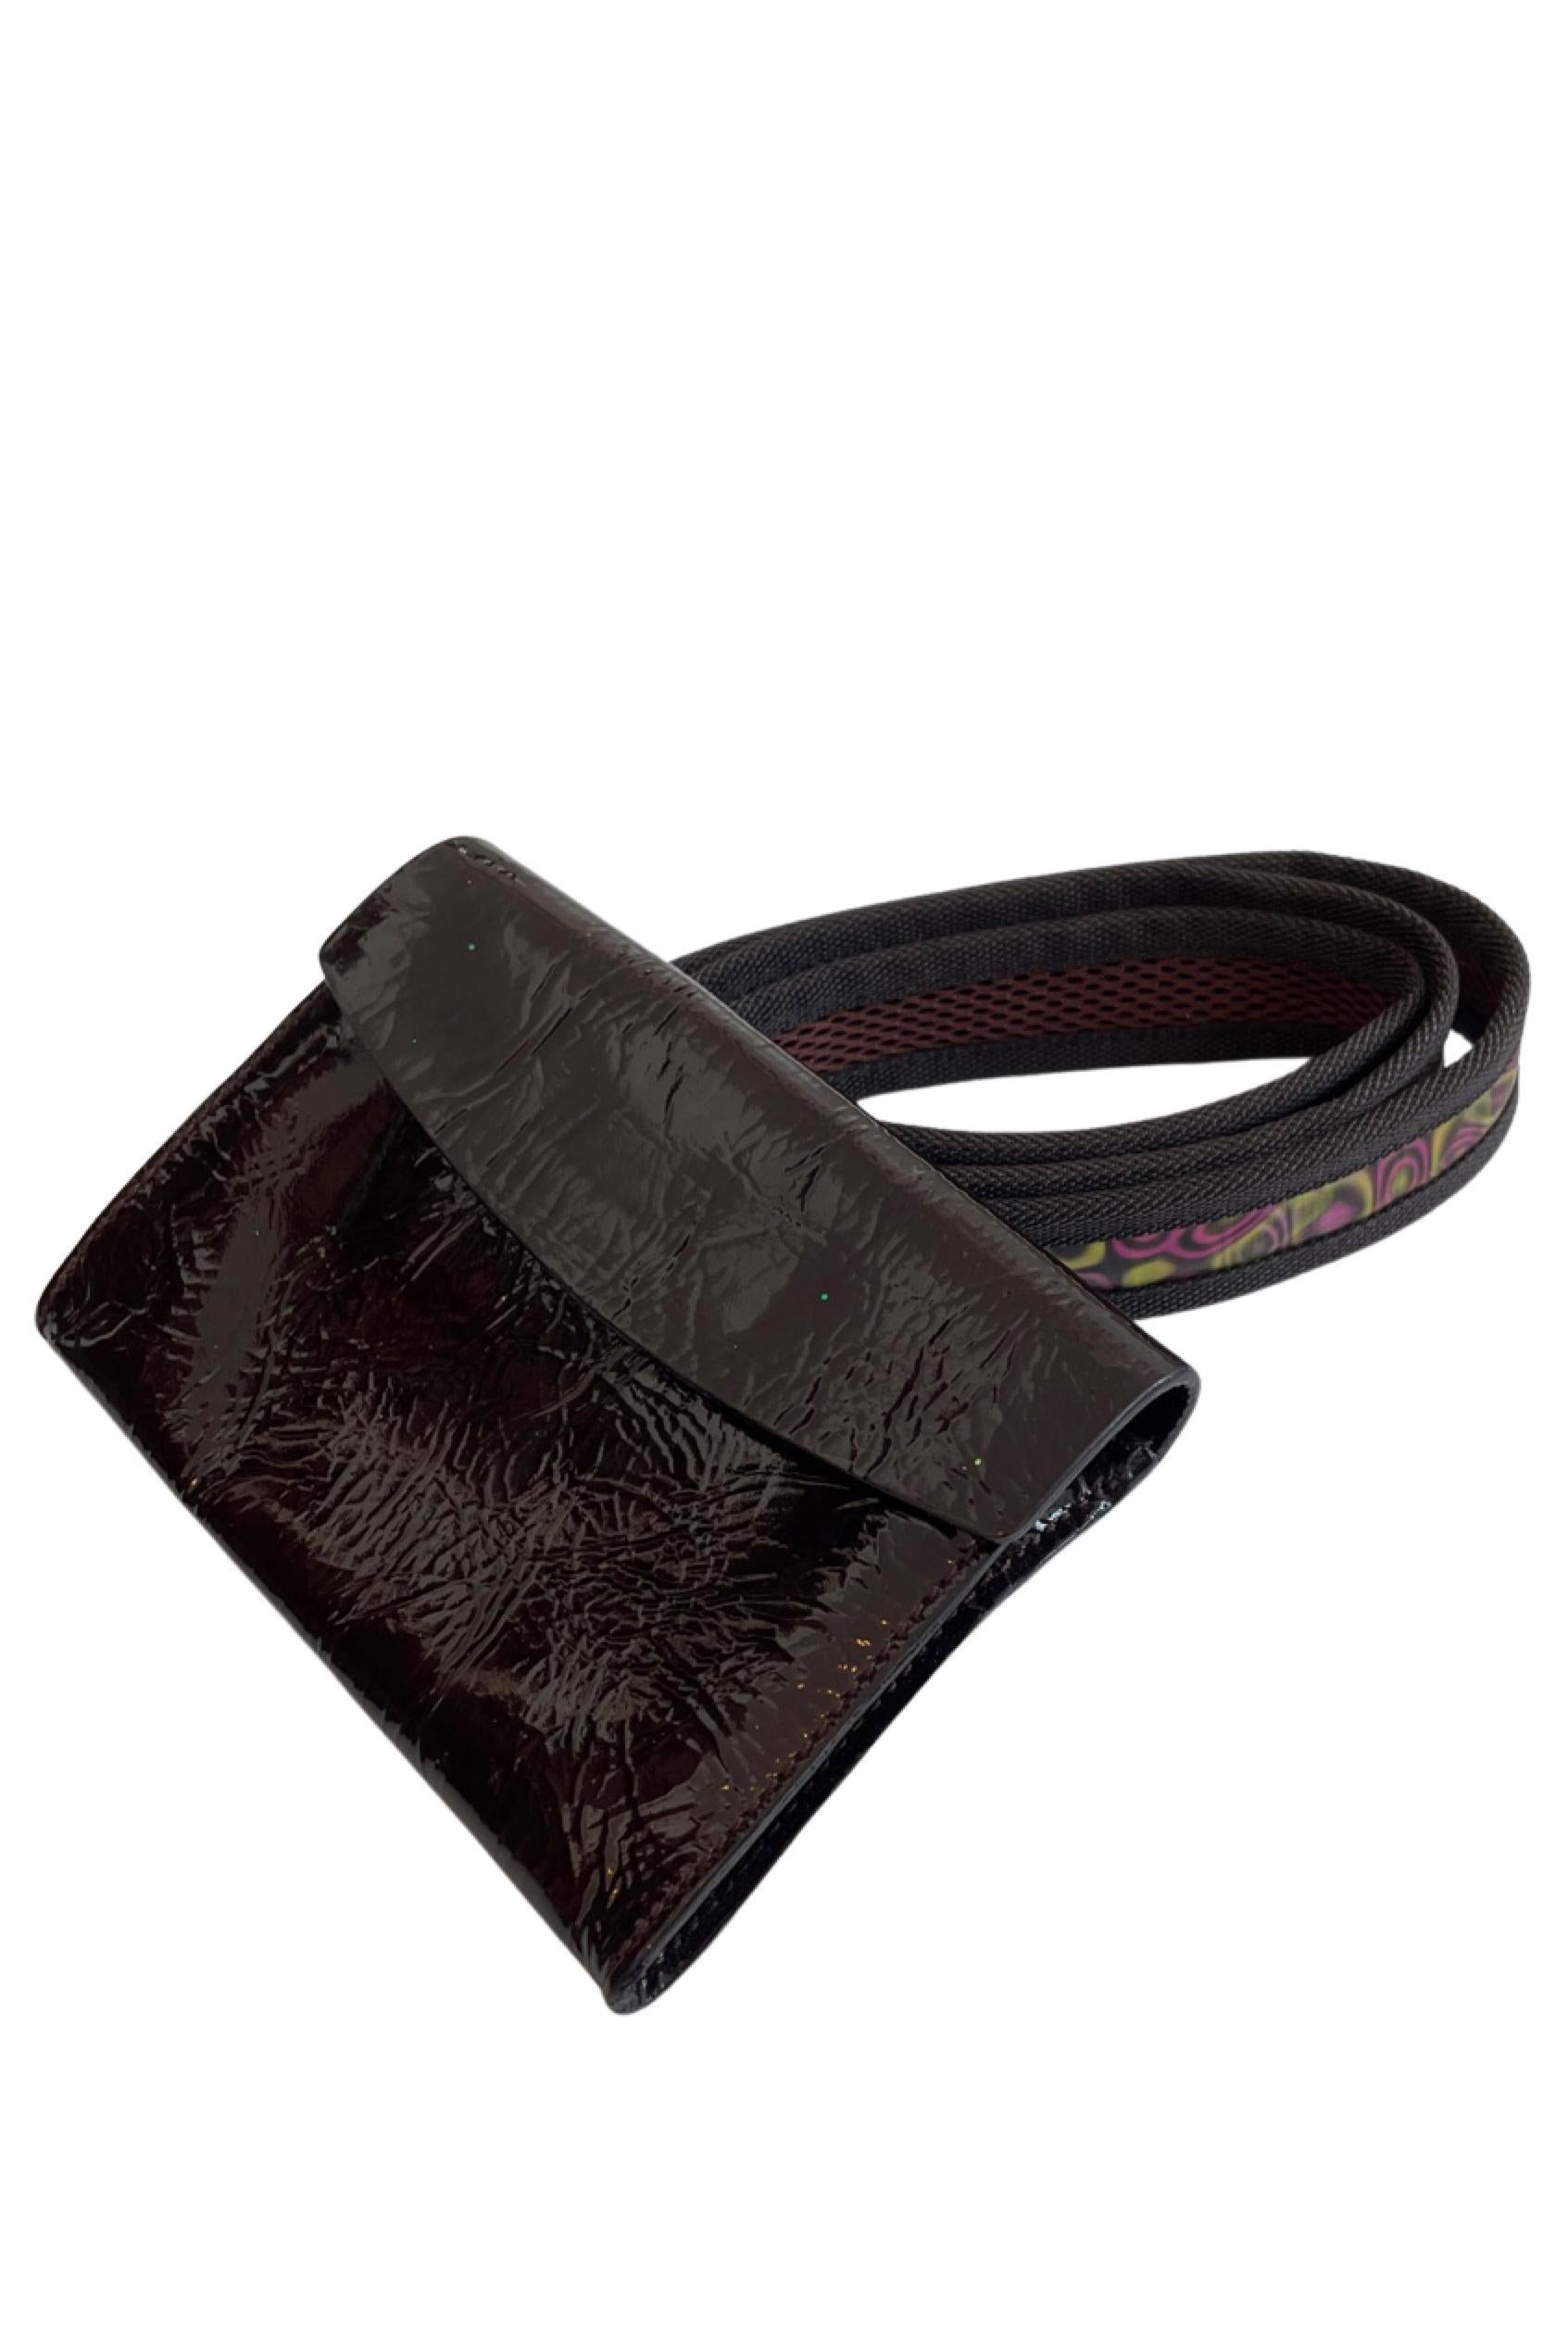 Miu Miu Brown Patent Leather Psychedelic Waist Bag Belt For Sale 2